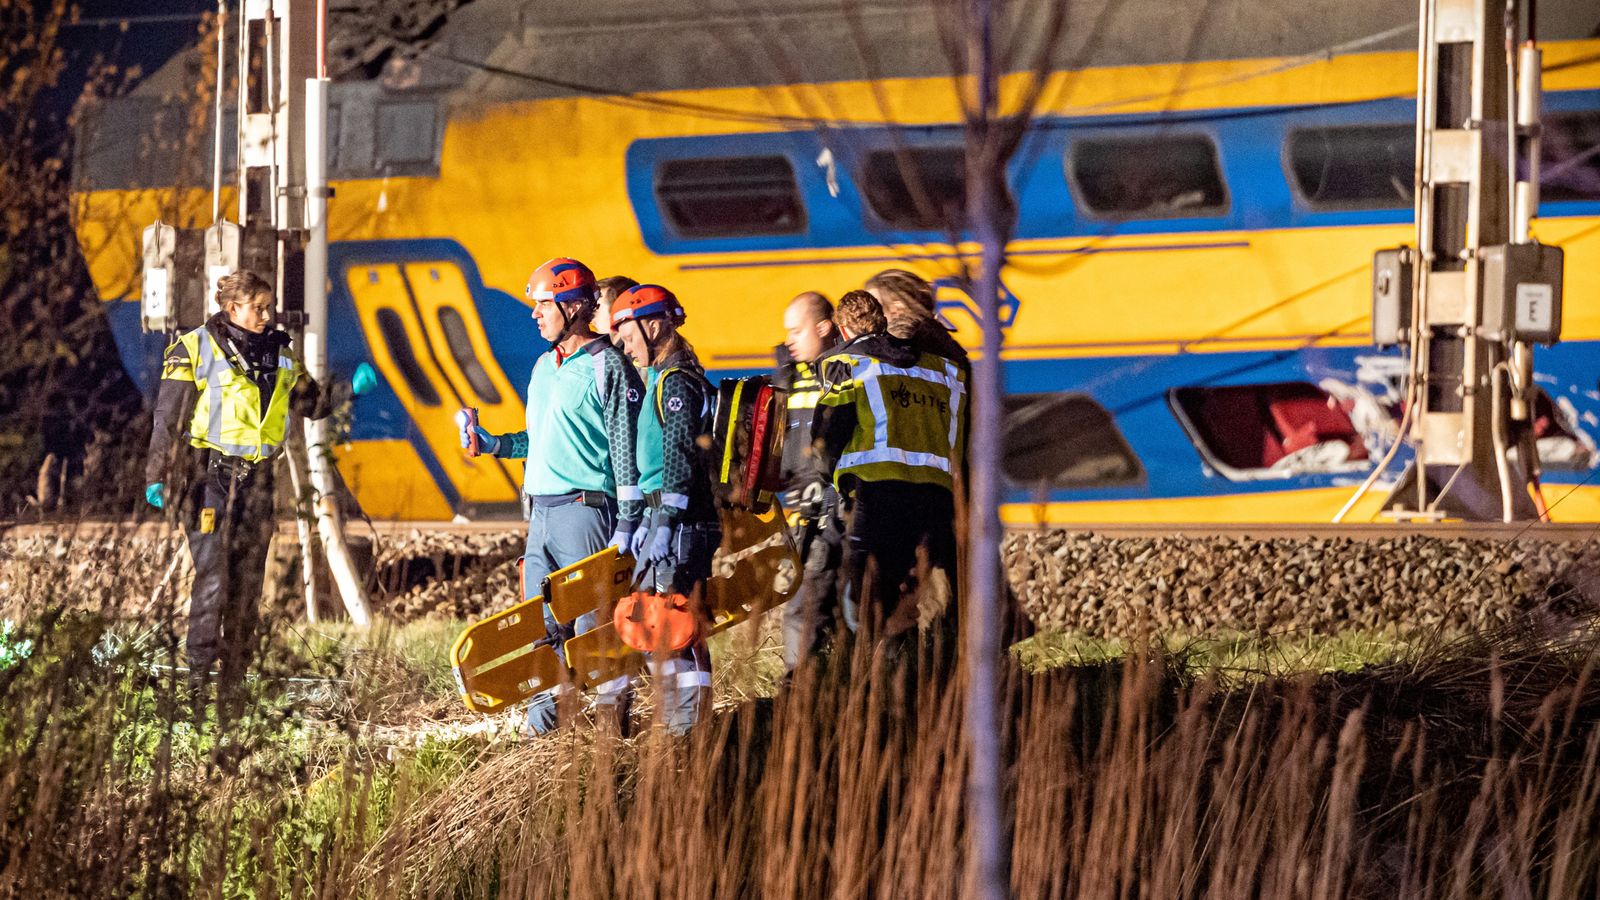 One dead and 30 injured after passenger train derails in the